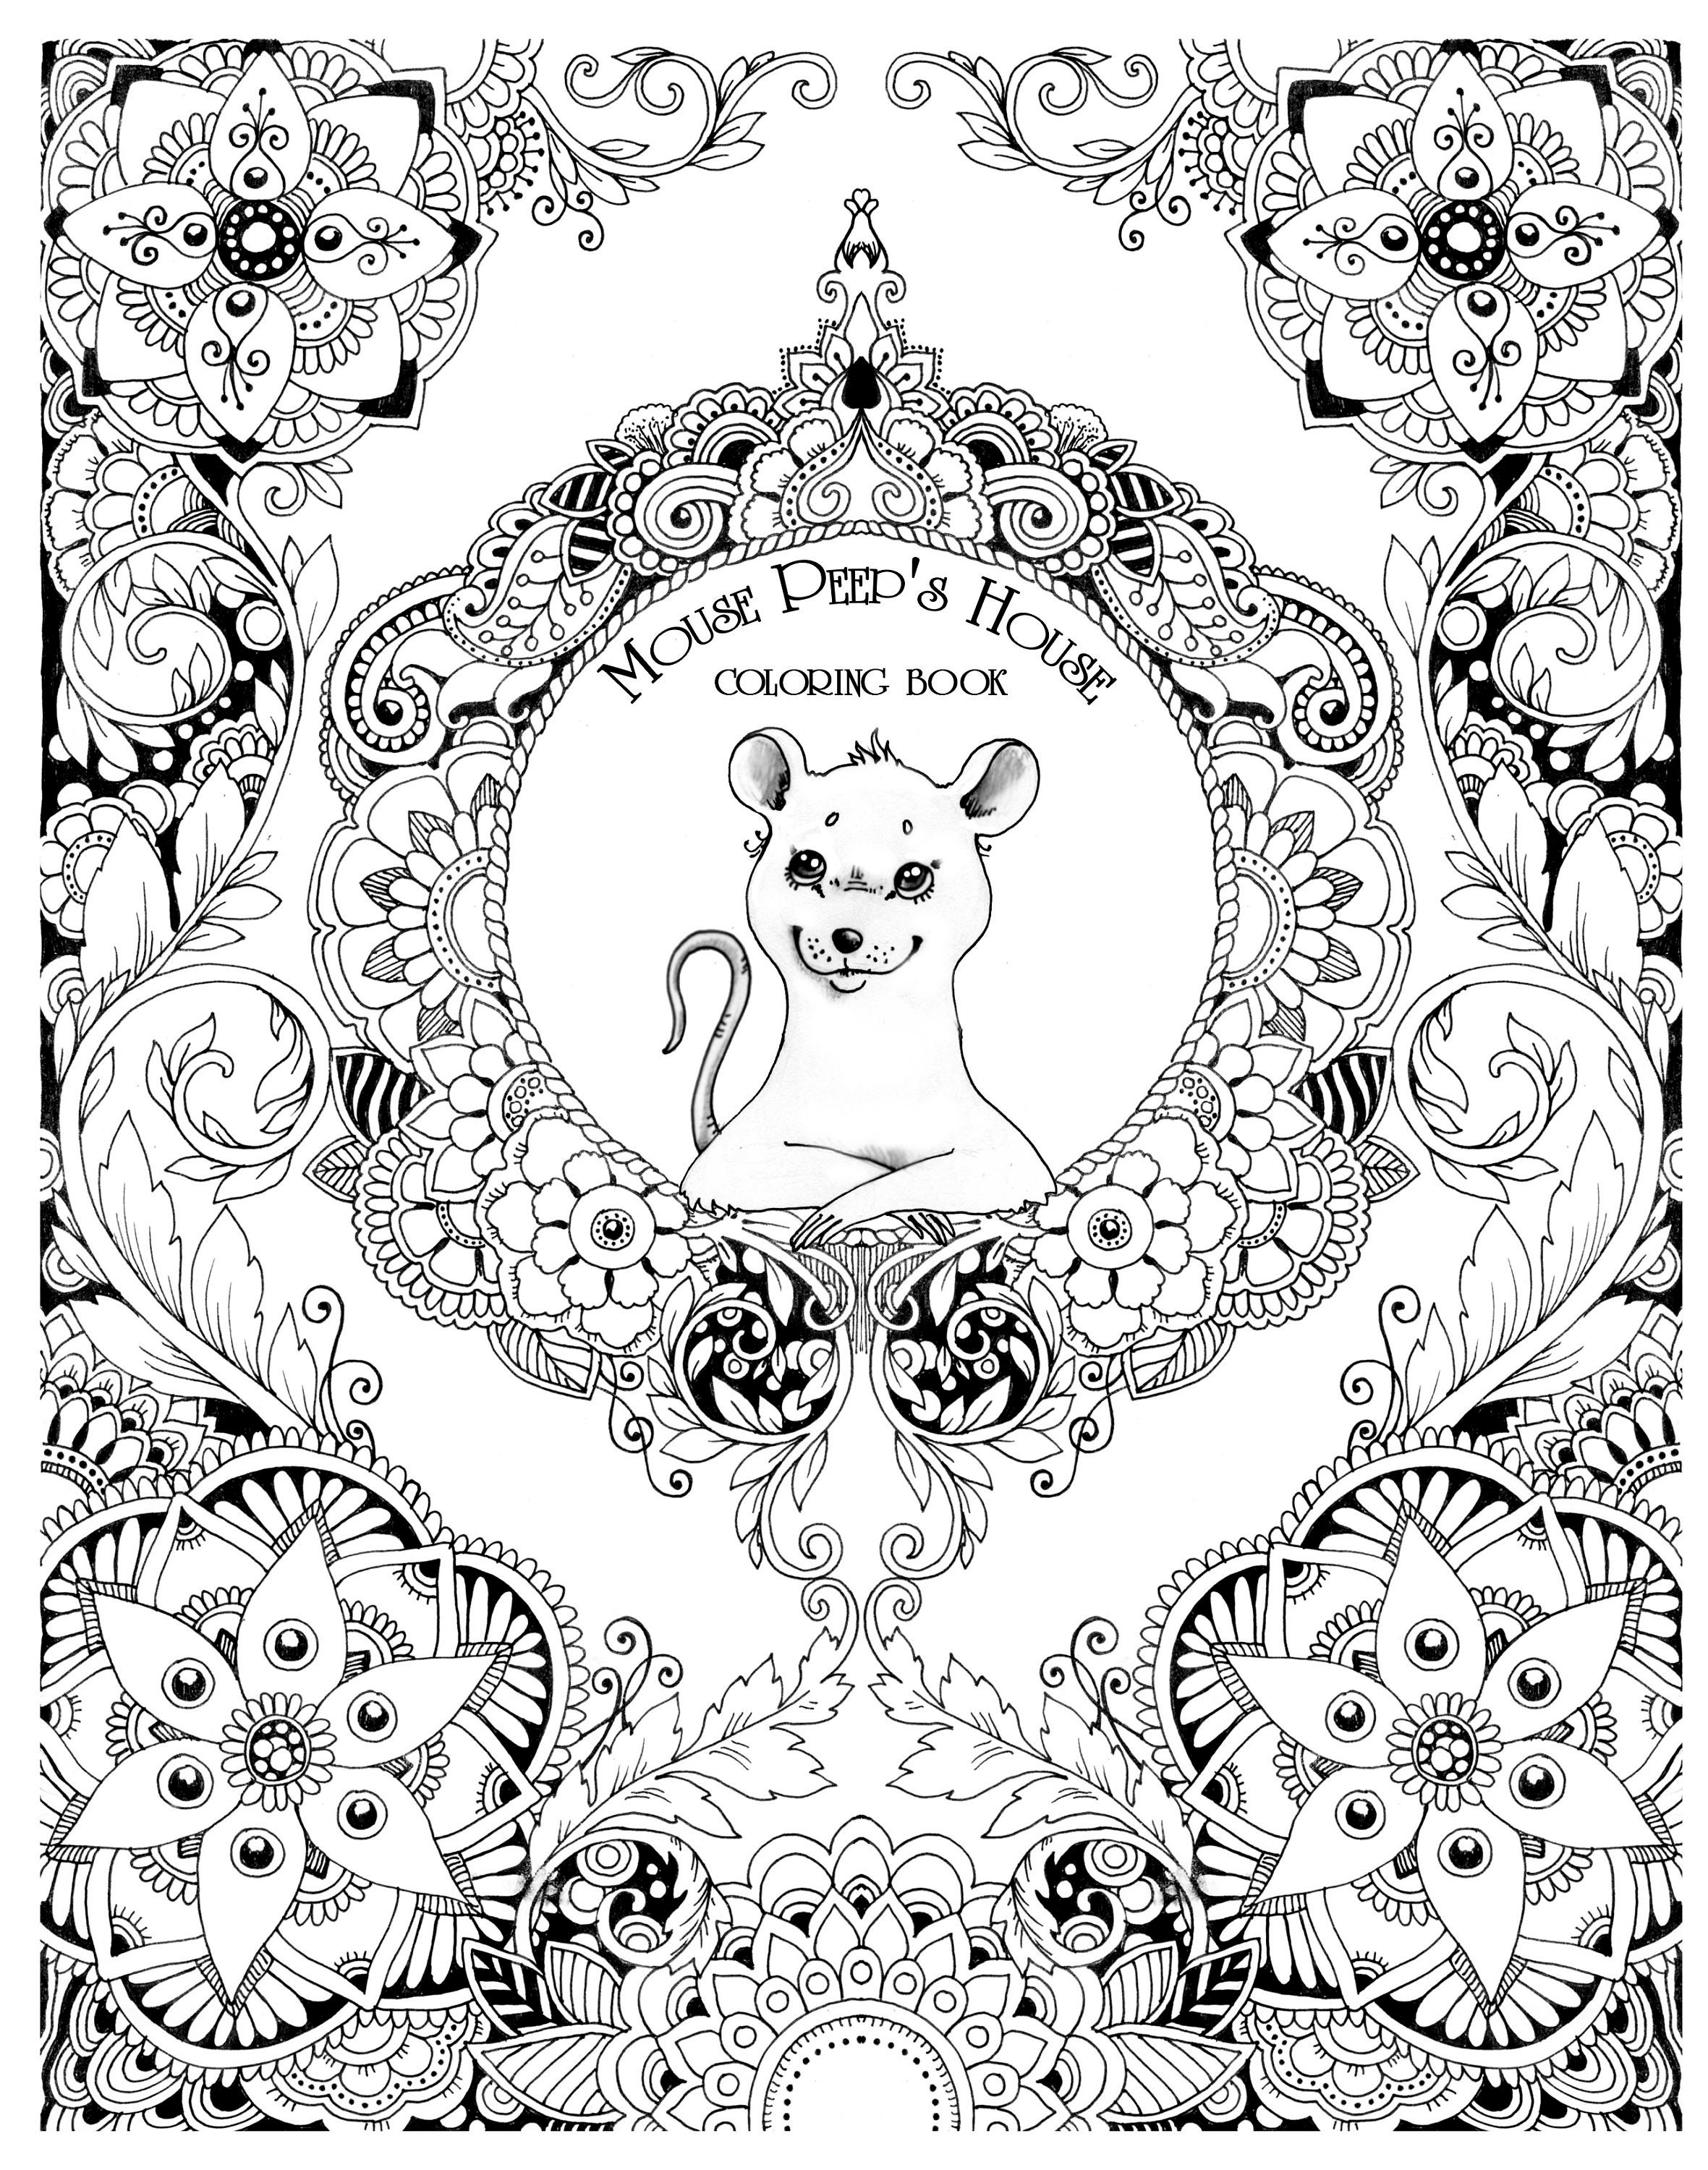 Musical Cabin Fever Colouring Ebook coloring Books/coloring Pages/adult  Coloring Books/coloring Books for Adults, Relaxing/gifts/music Art 